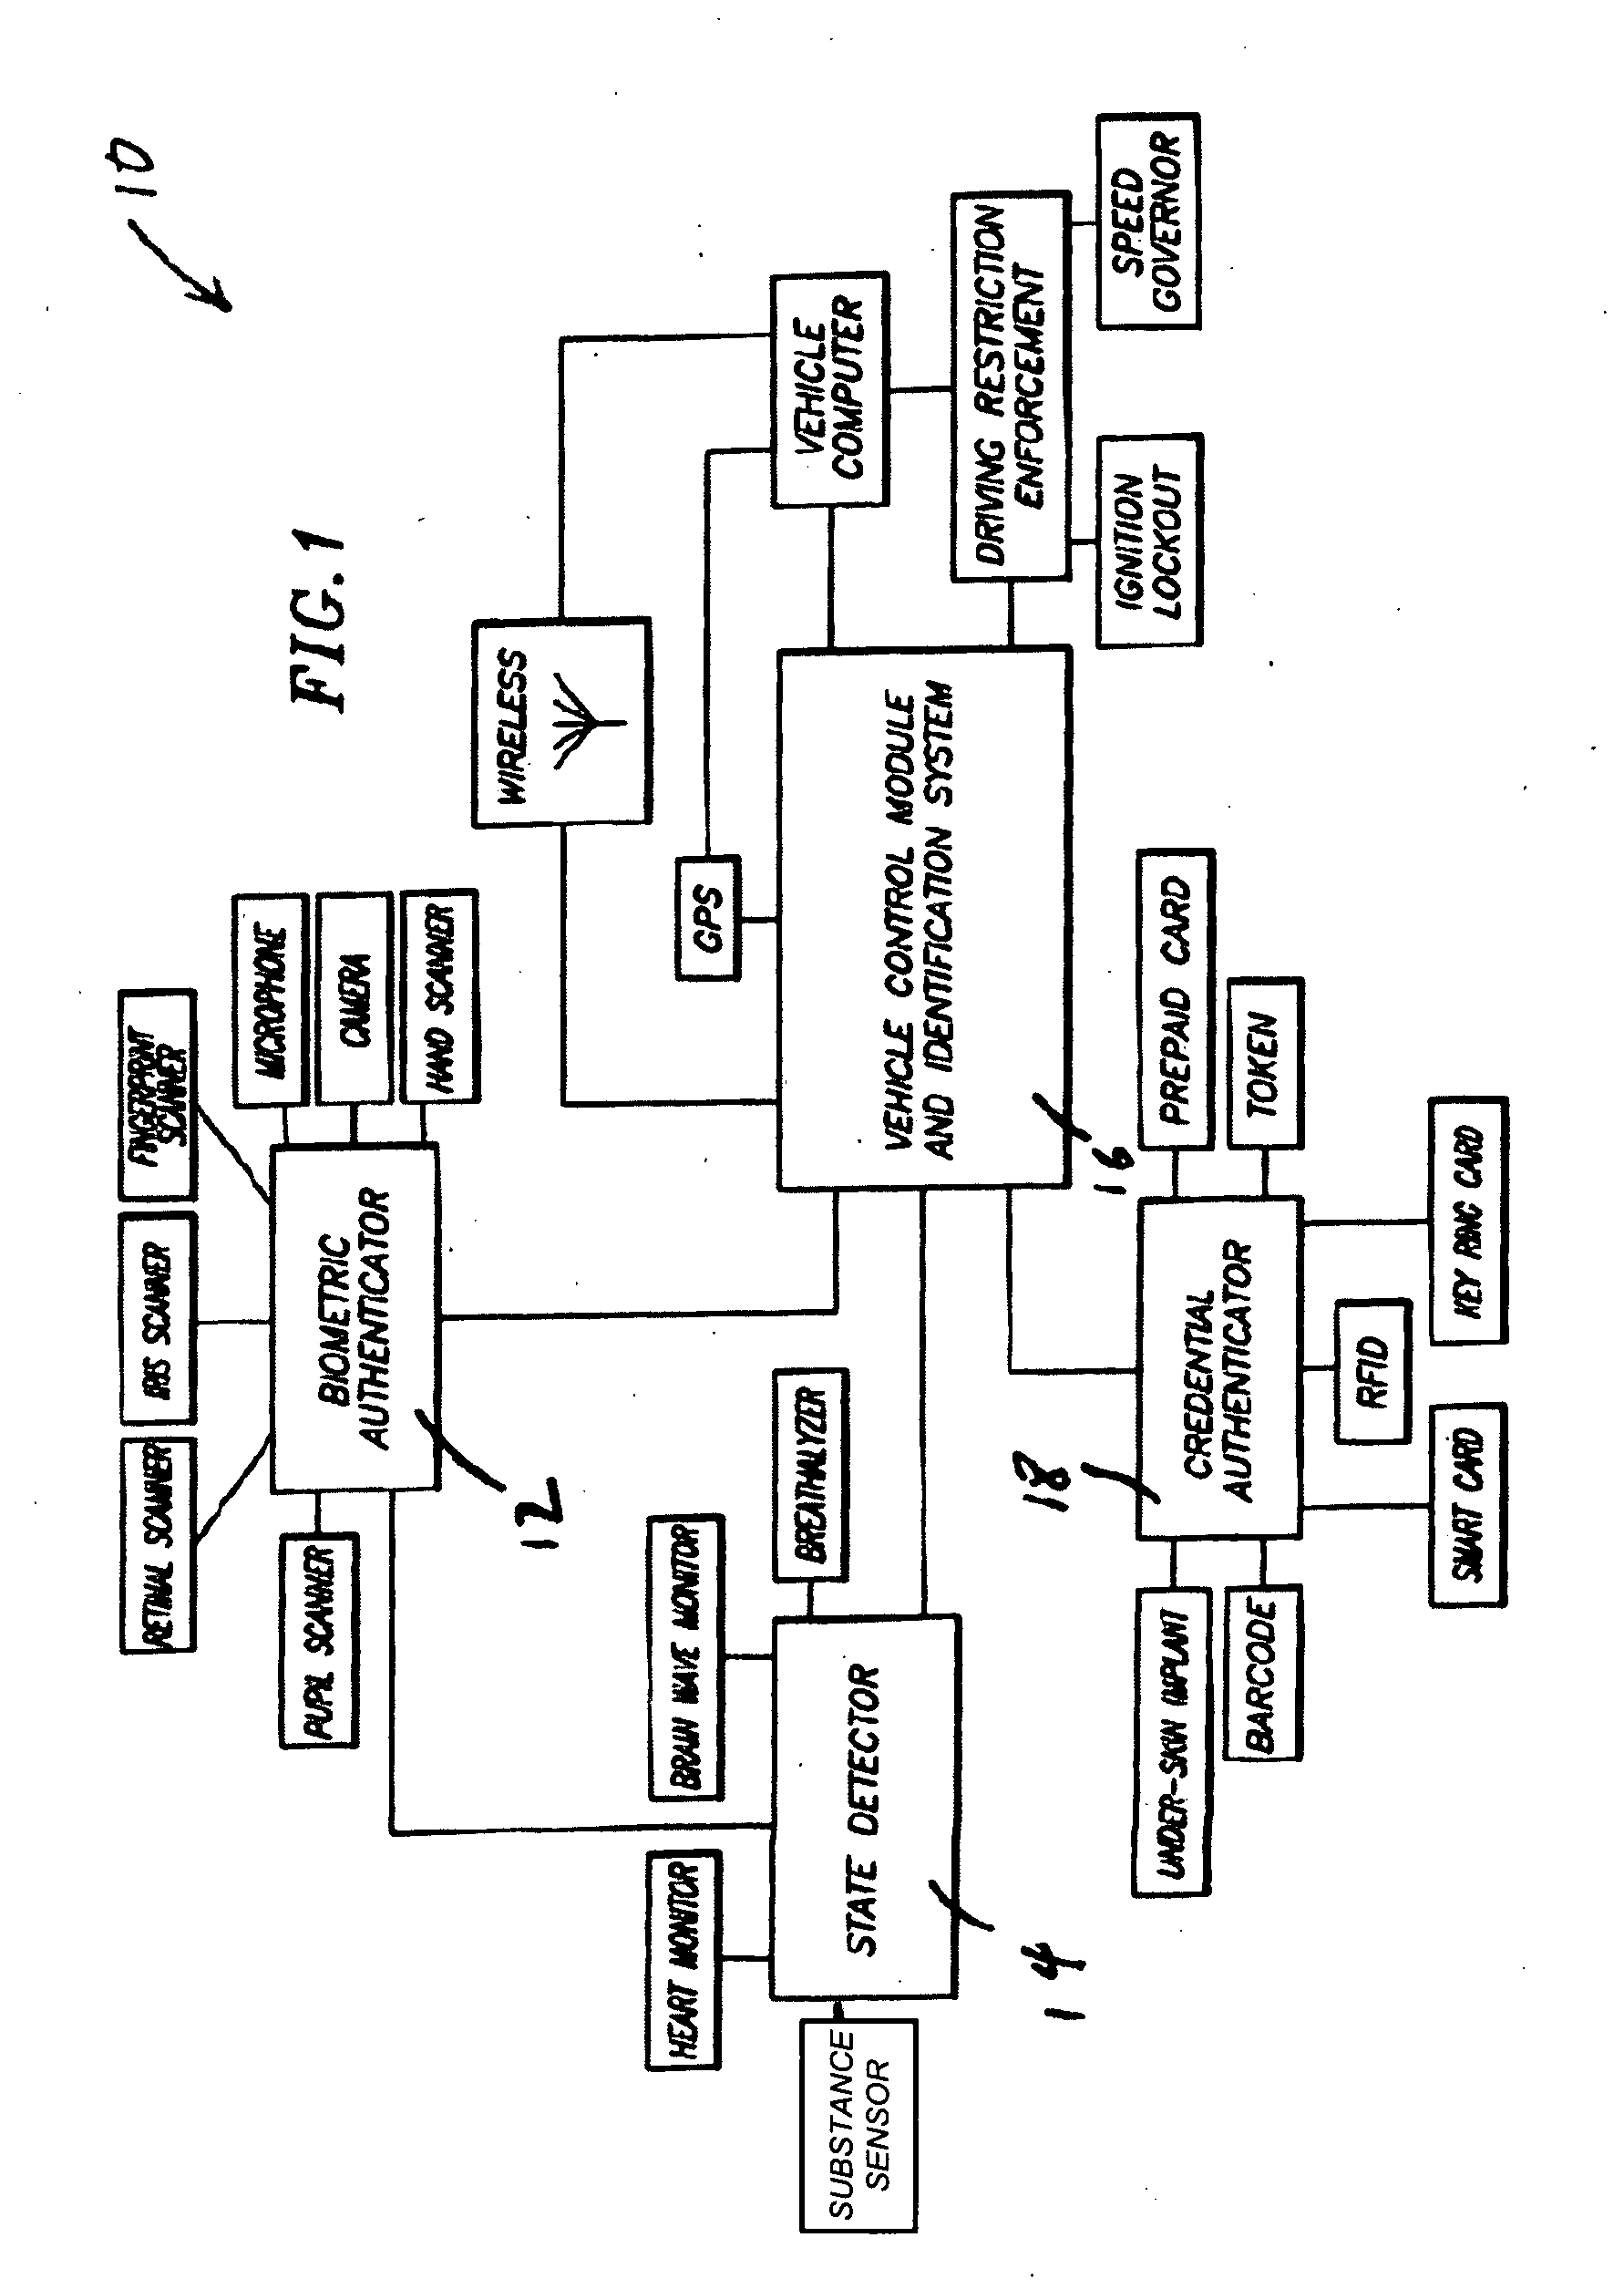 Method and system for preventing unauthorized use of a vehicle by an operator of the vehicle